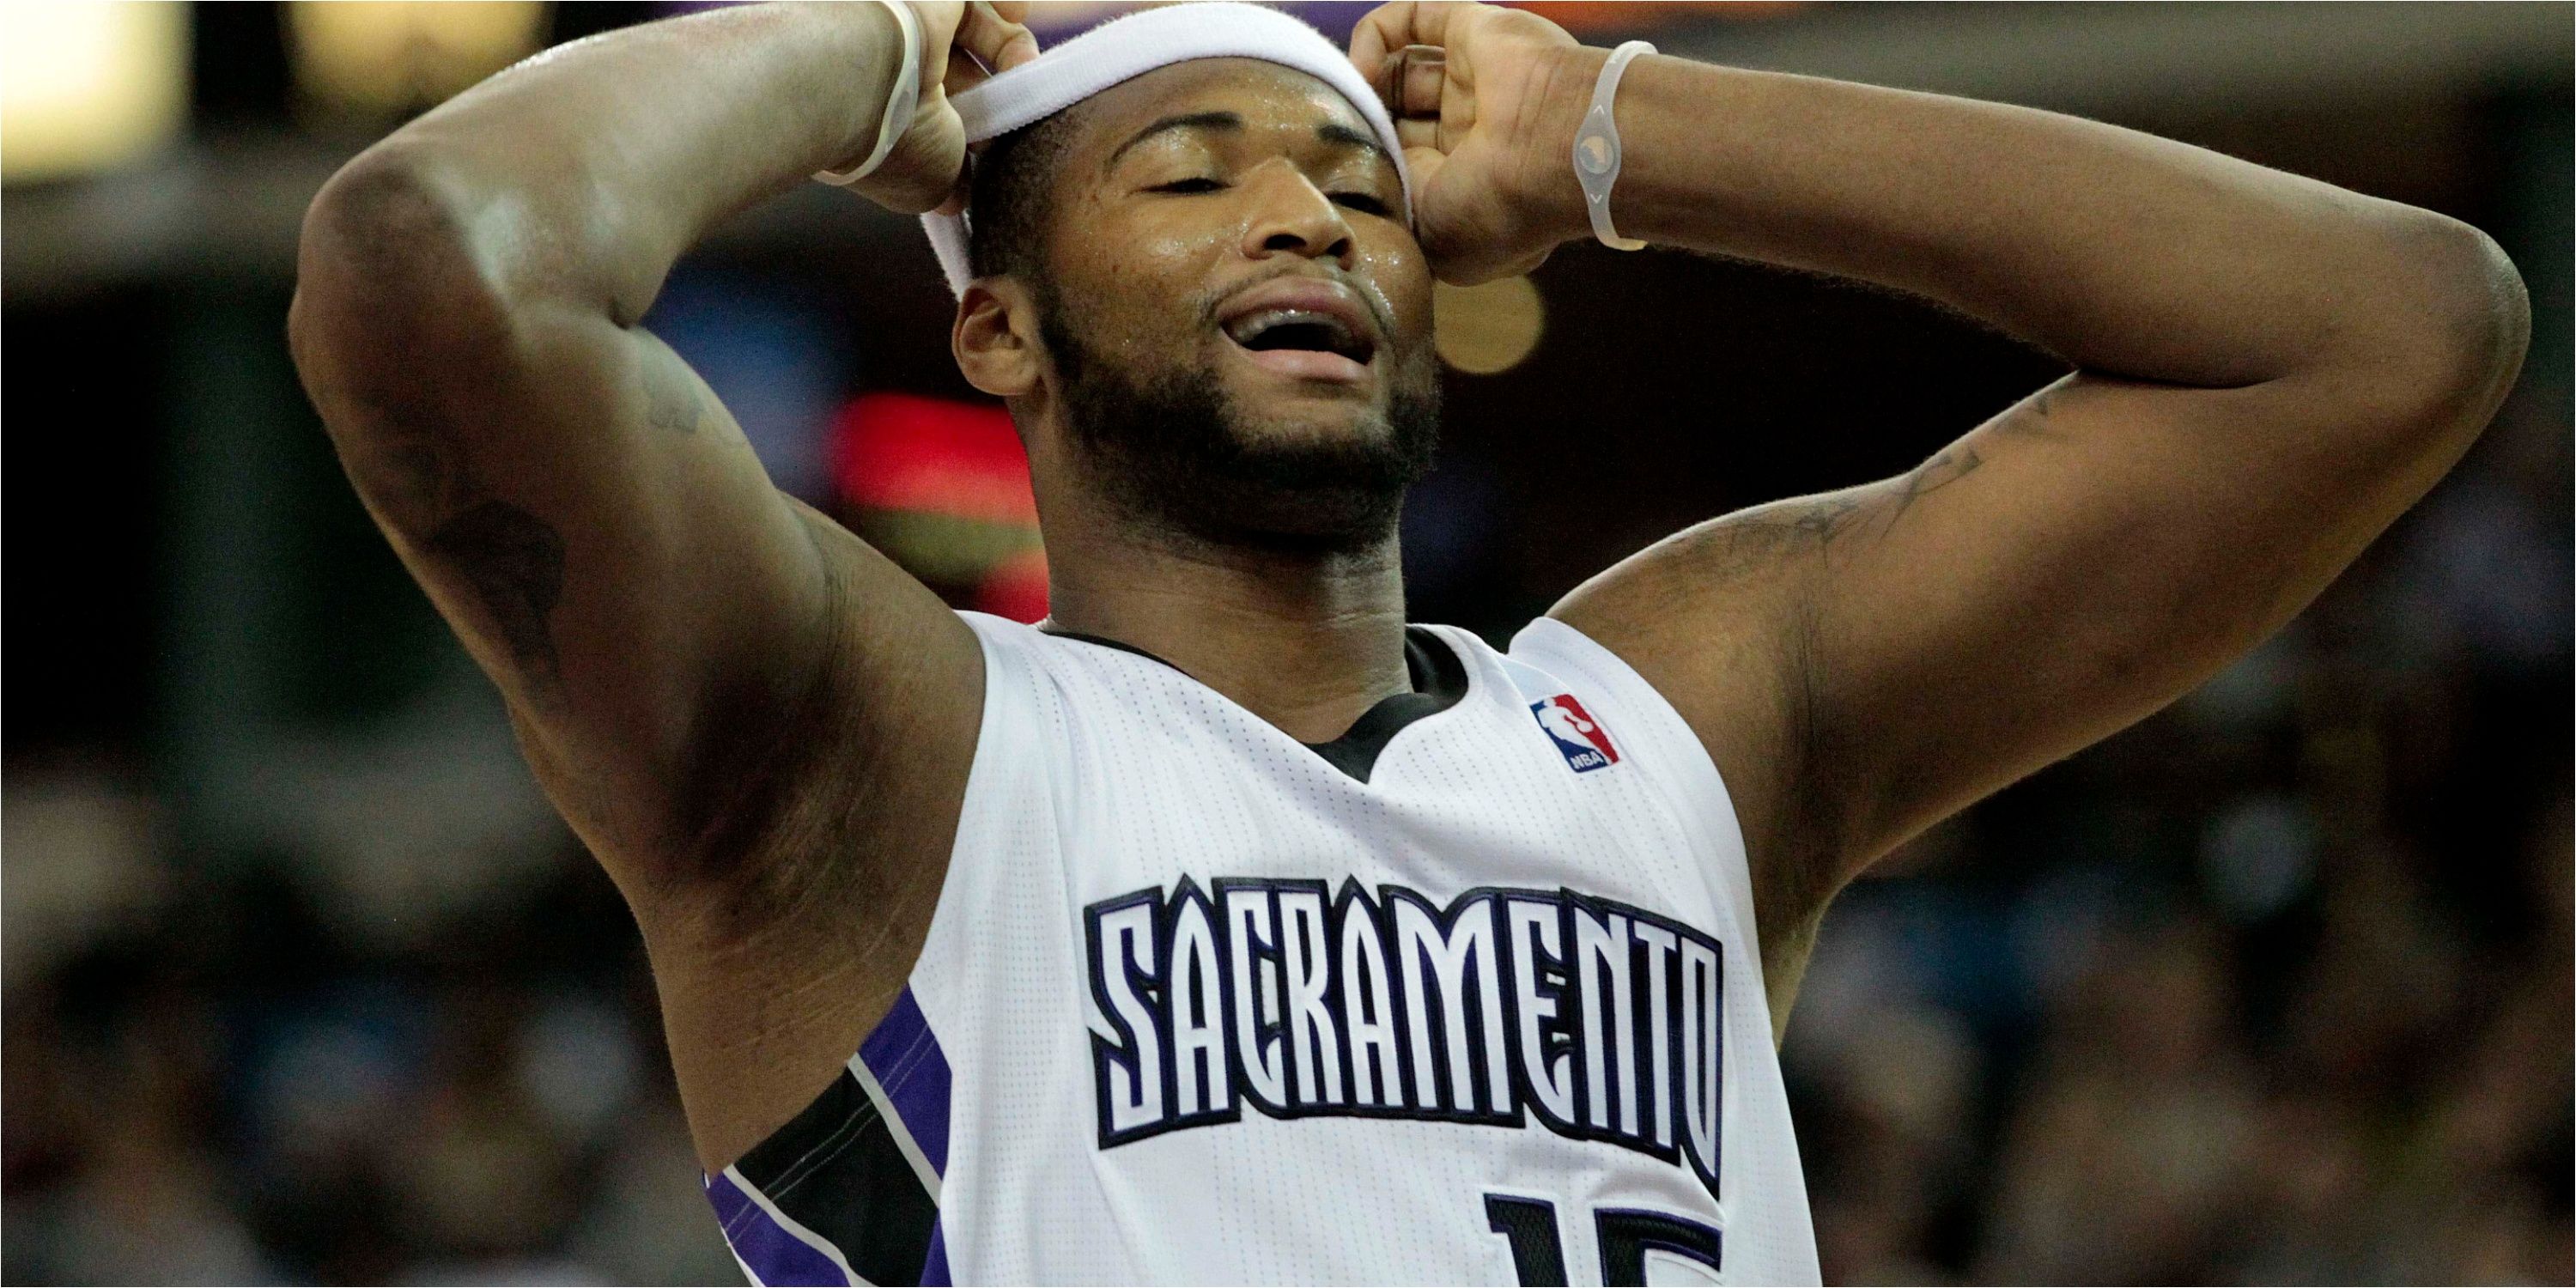 Kings center DeMarcus Cousins pulls off headband in frustration